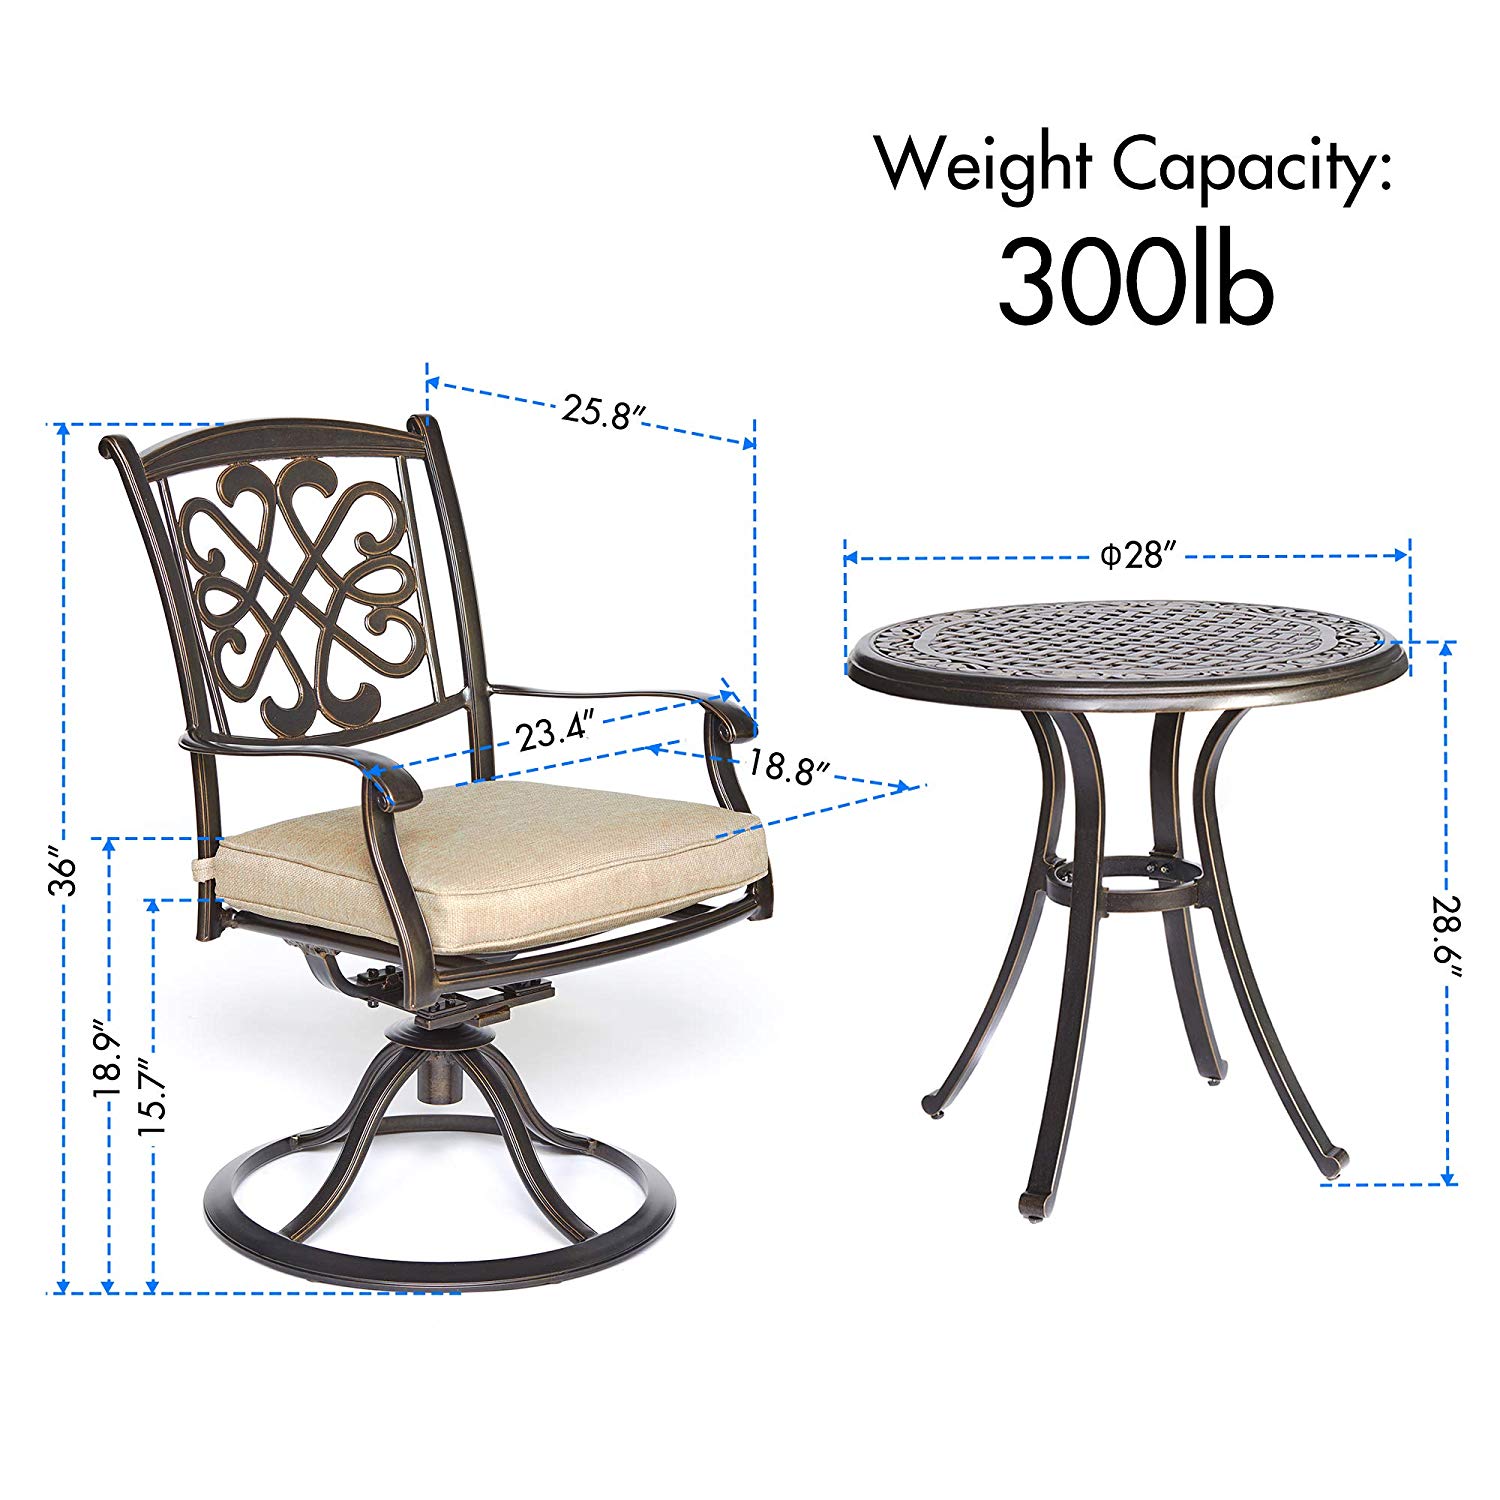 3 Piece Bistro Table Chairs Set, Cast Aluminum Dining Table Patio Glider Chairs Garden Backyard Outdoor Furniture - image 4 of 7